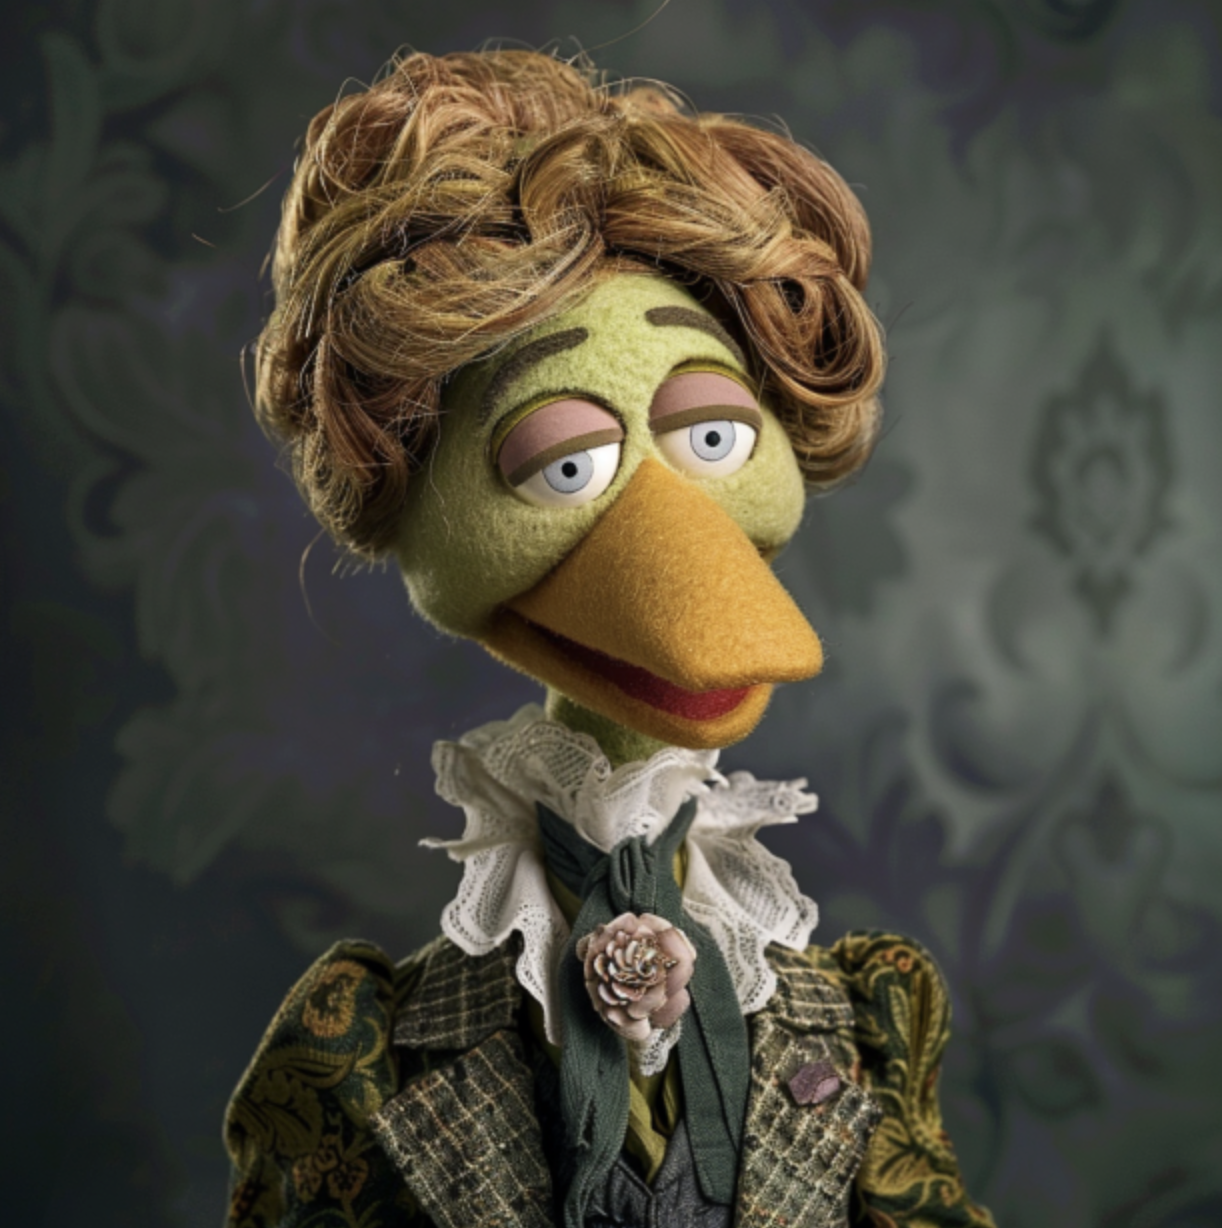 Muppet dressed in a period costume with duckbill-type mouth/nose, upswept hair, ruffled collar and ornate details